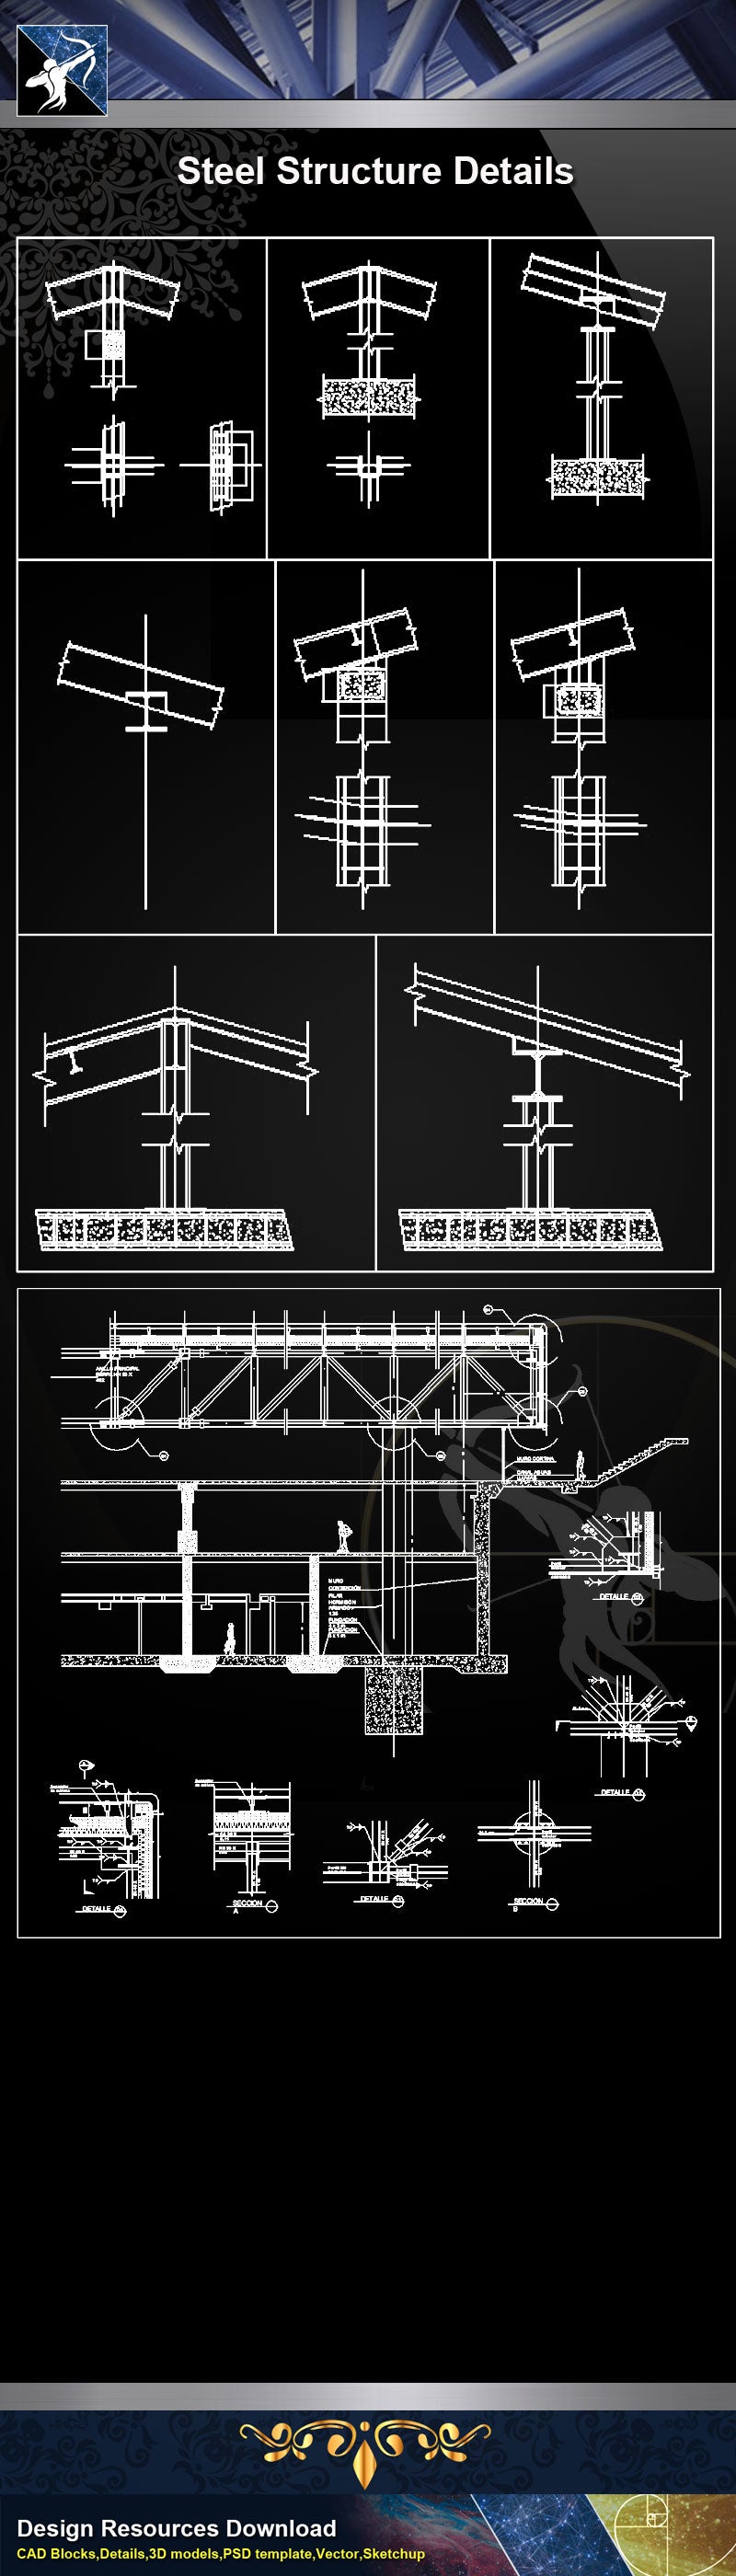 ★【Steel Structure Details】Steel Structure Details Collection V.7